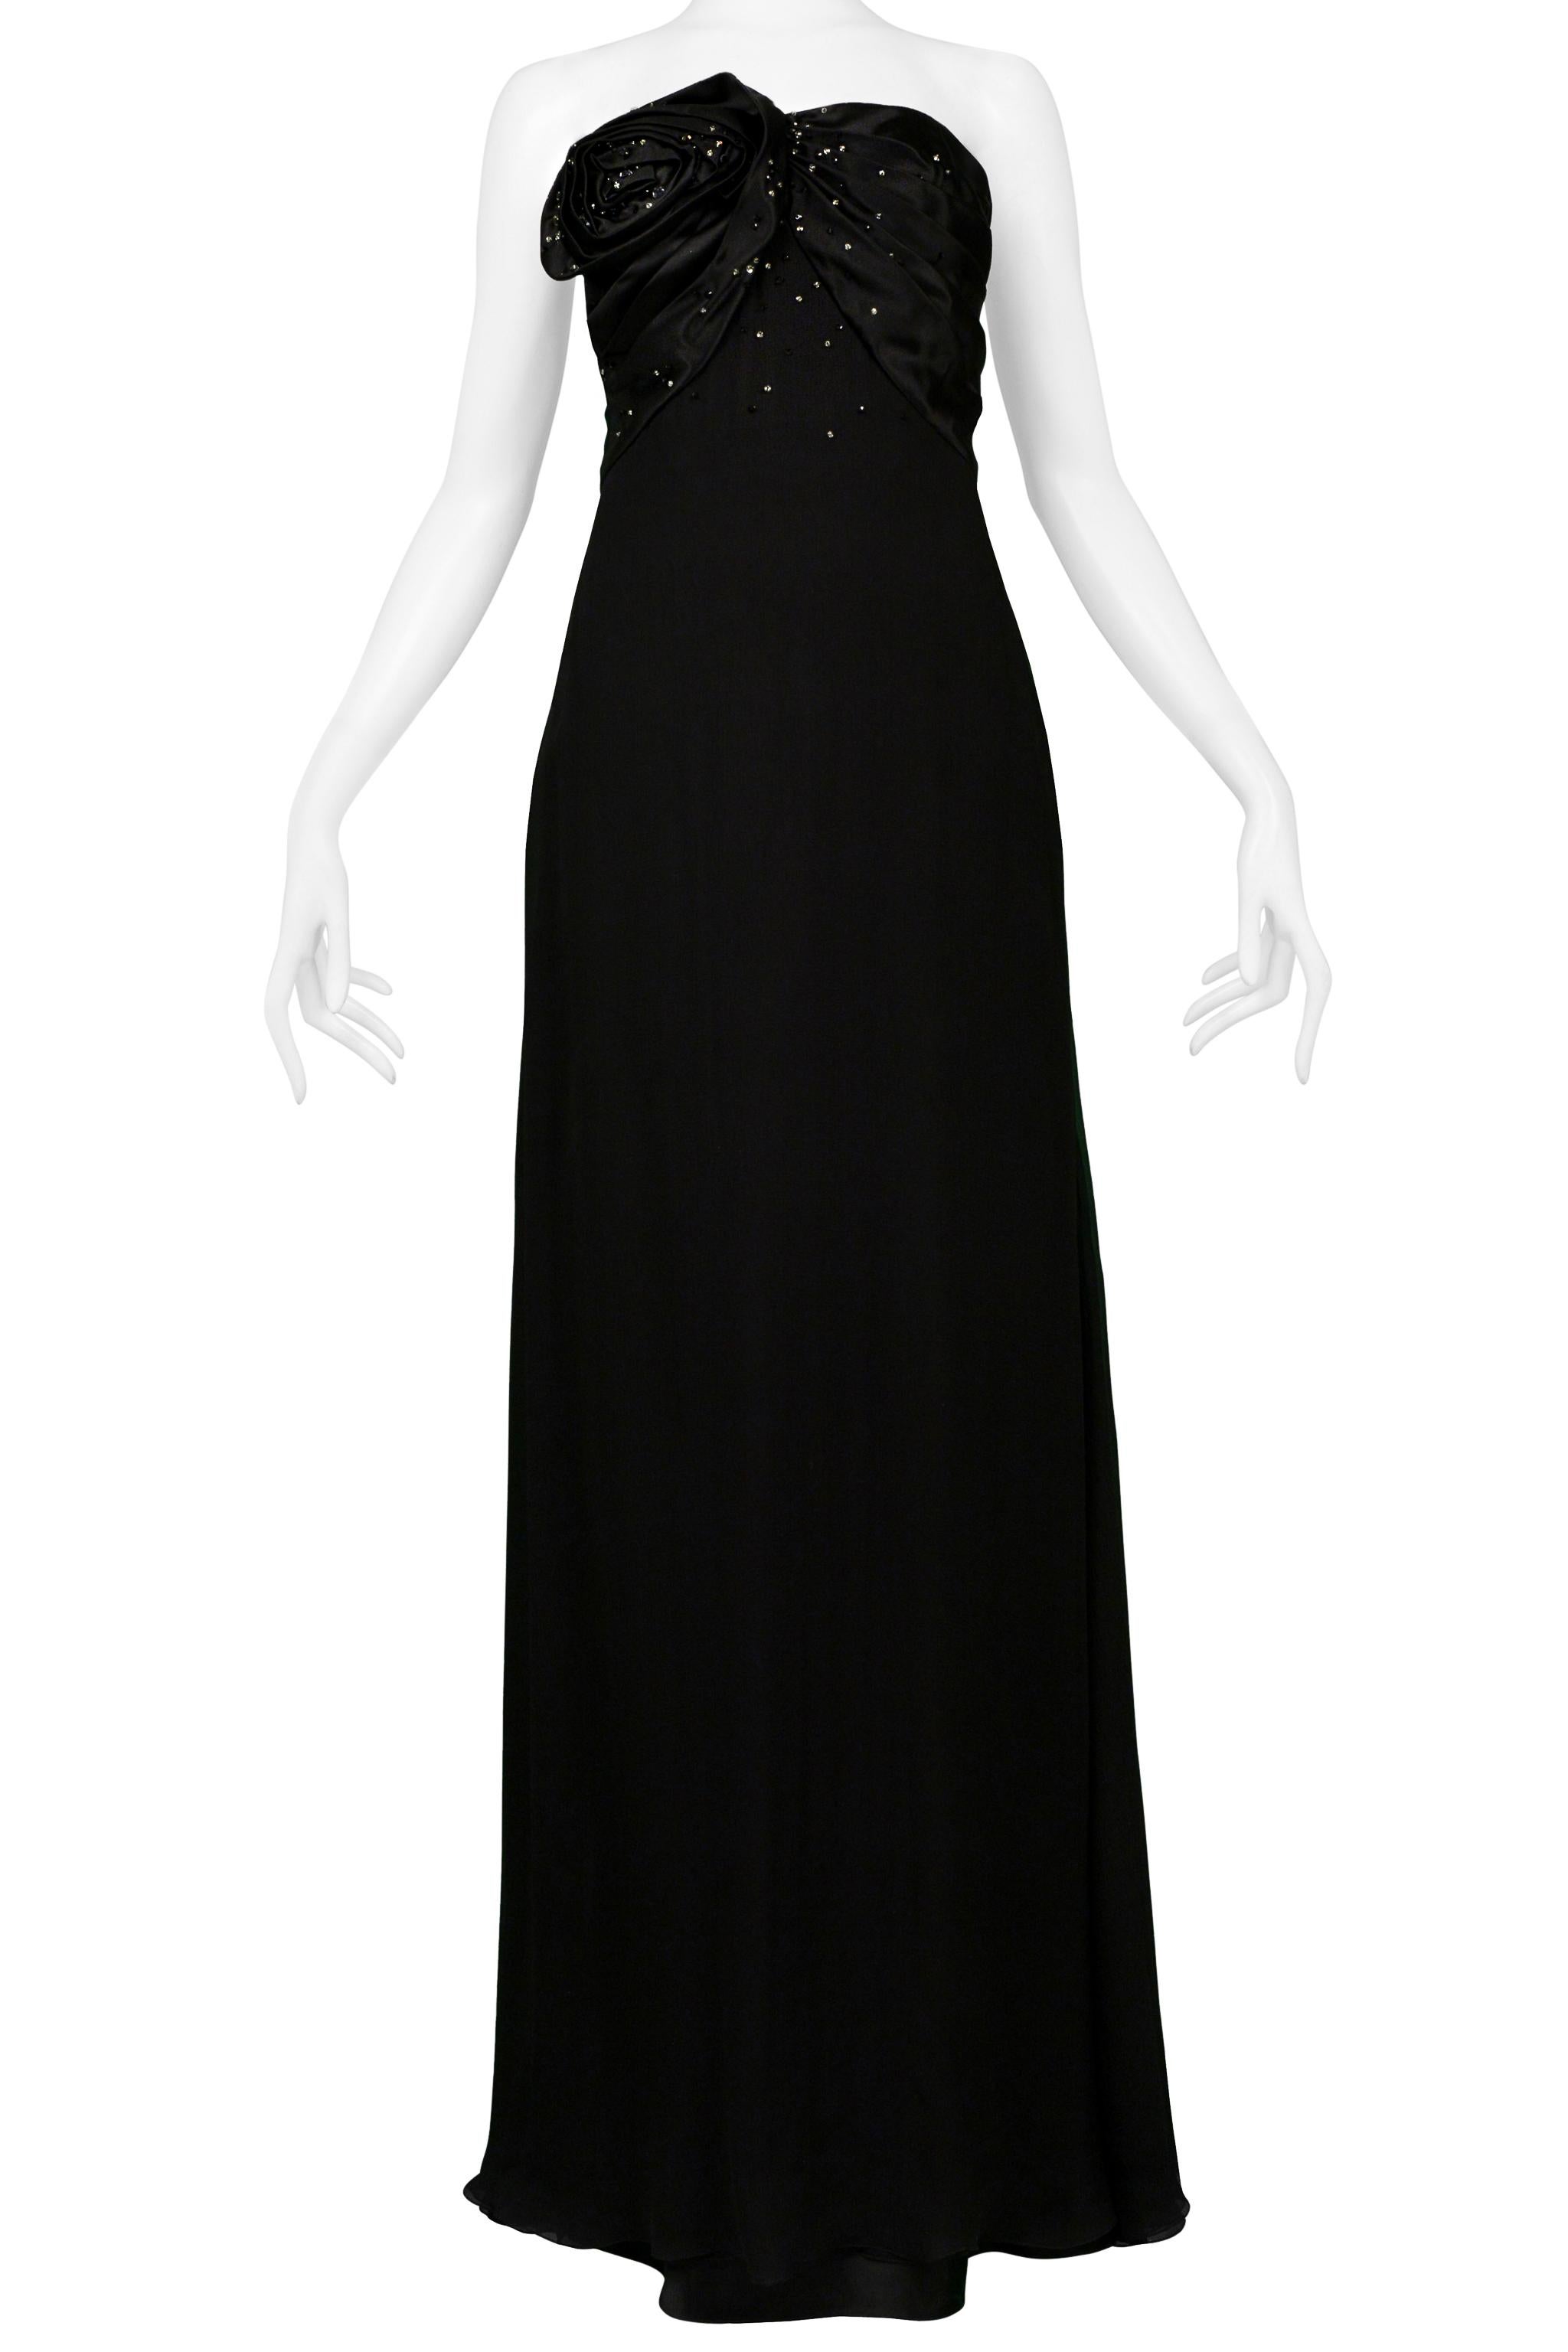 Resurrection Vintage is excited to offer a stunning vintage Christian Dior by John Galliano evening gown featuring a heavily rhinestoned bodice, rosette applique, can be worn with straps or without, and floor length.

Christian Dior by John